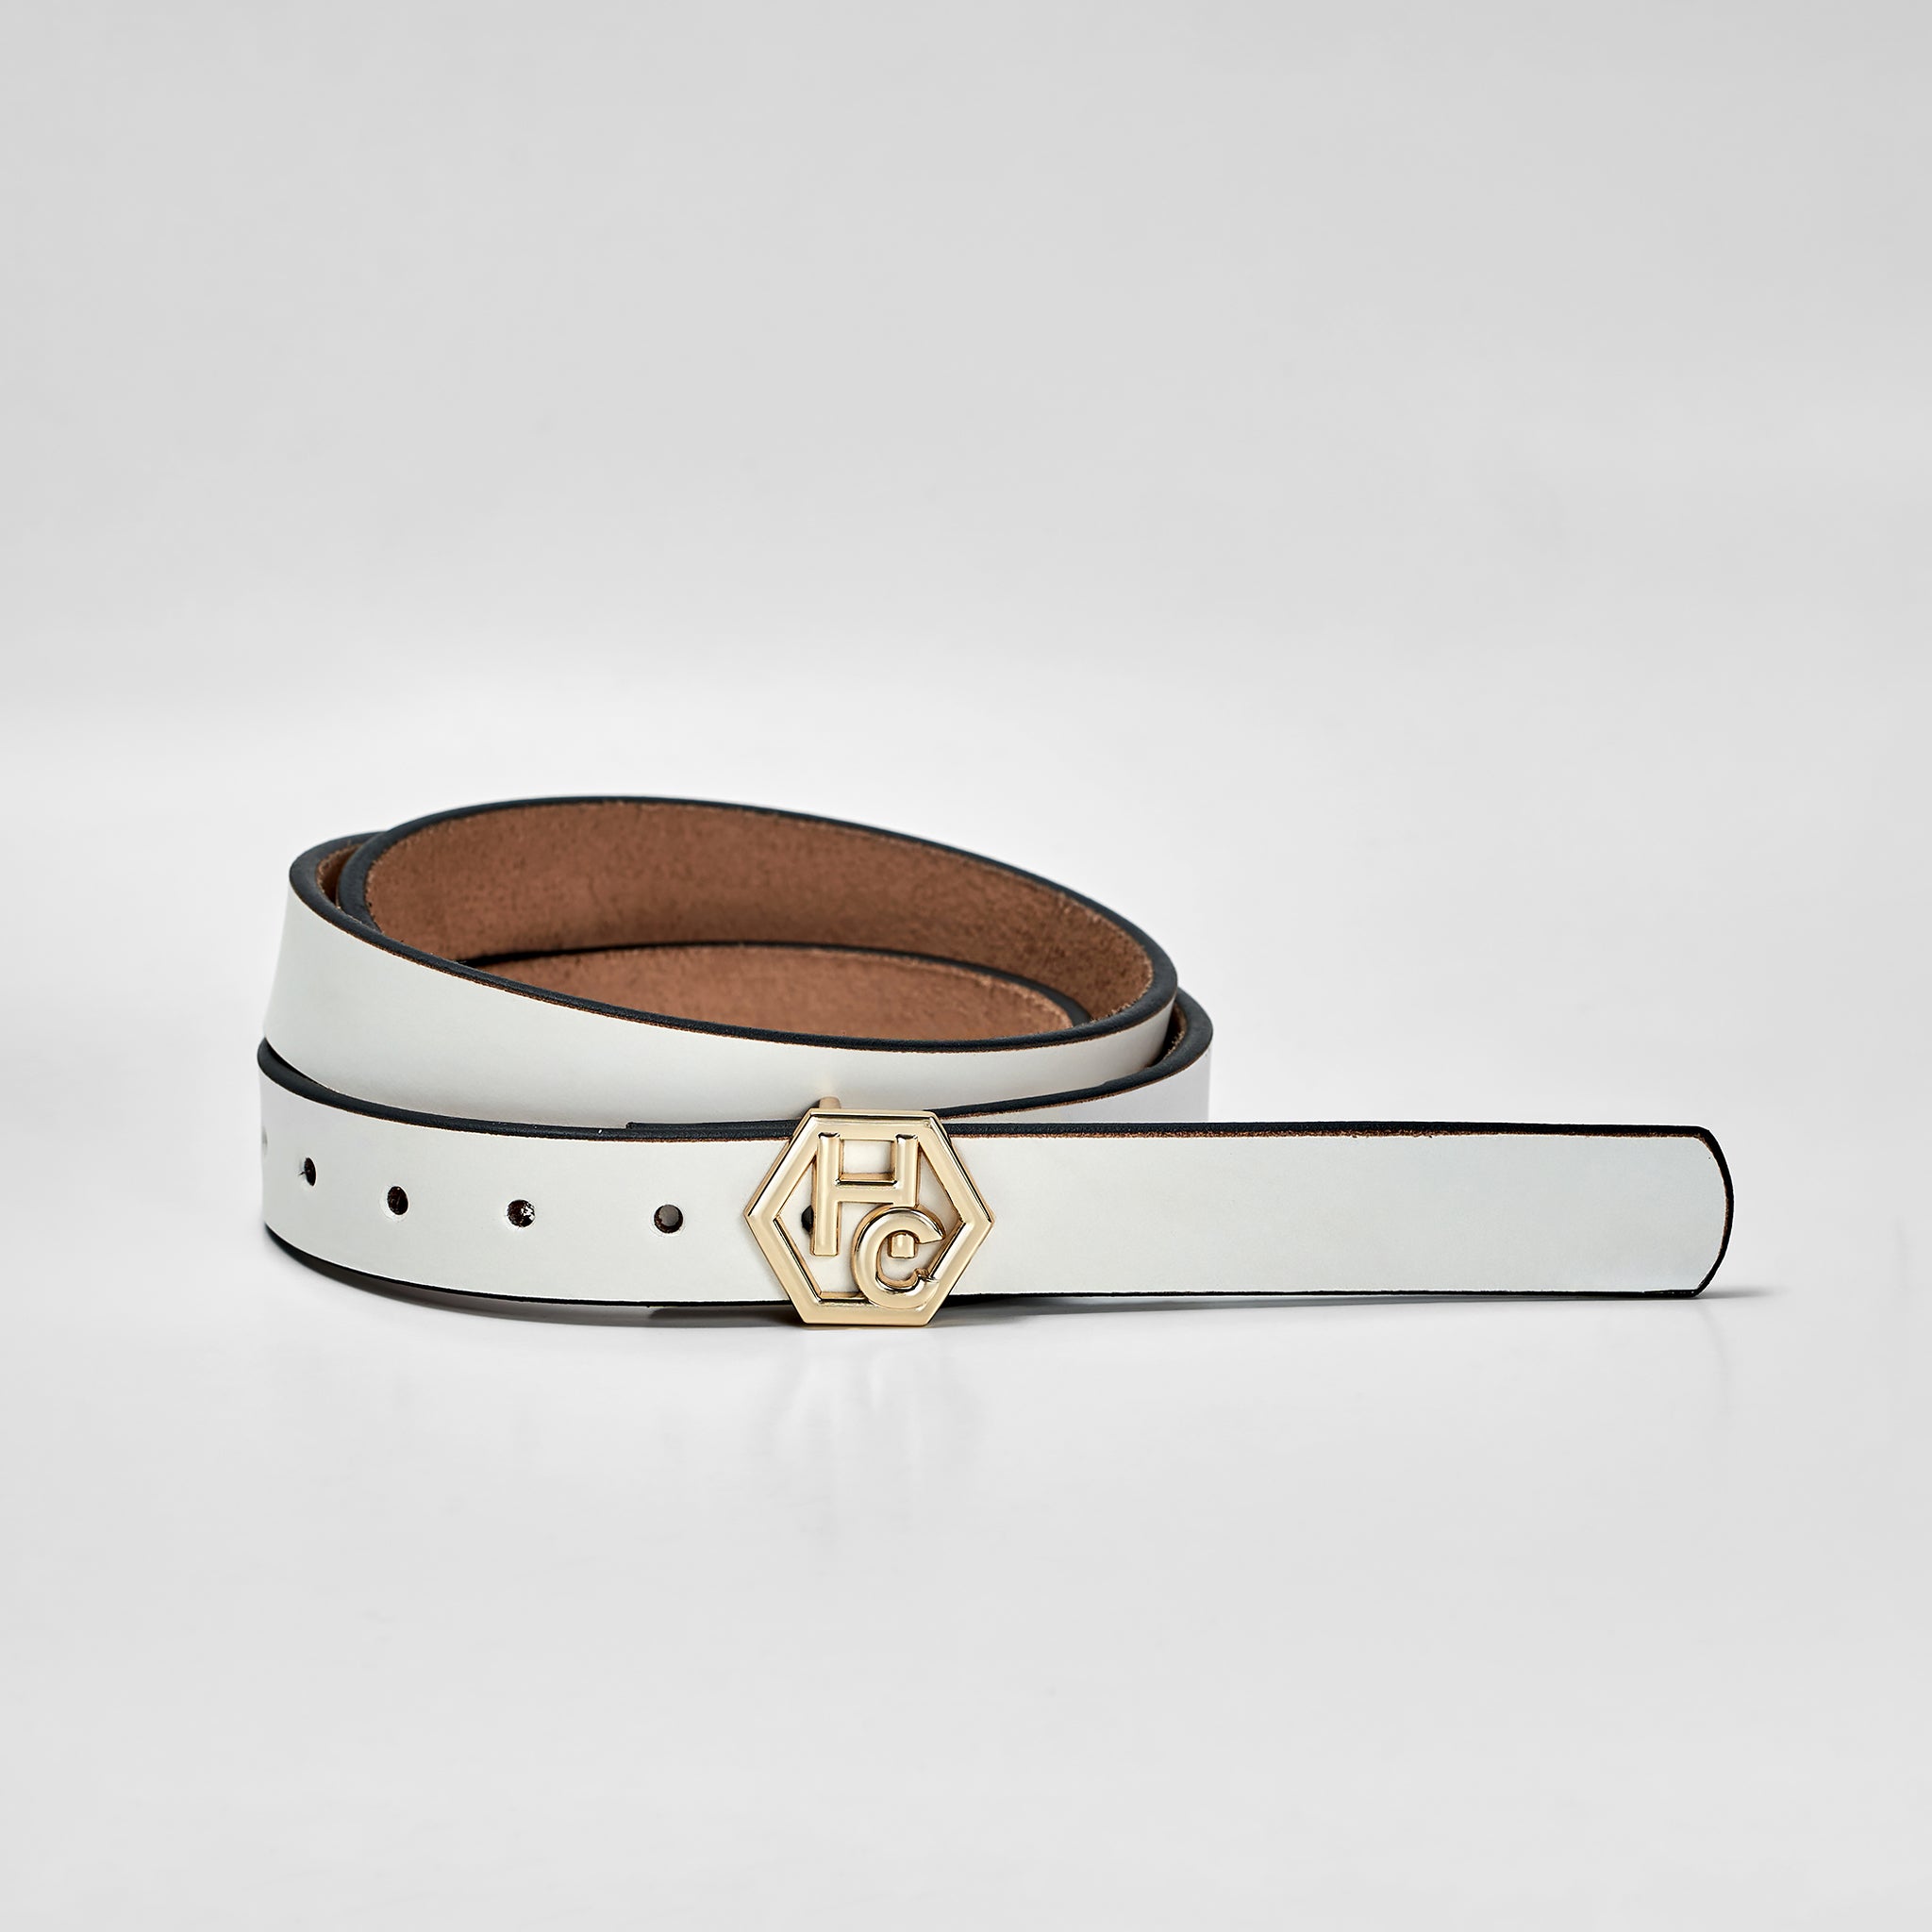 Hedonist Chicago Seamless White Leather Belt 1" 32381372563607